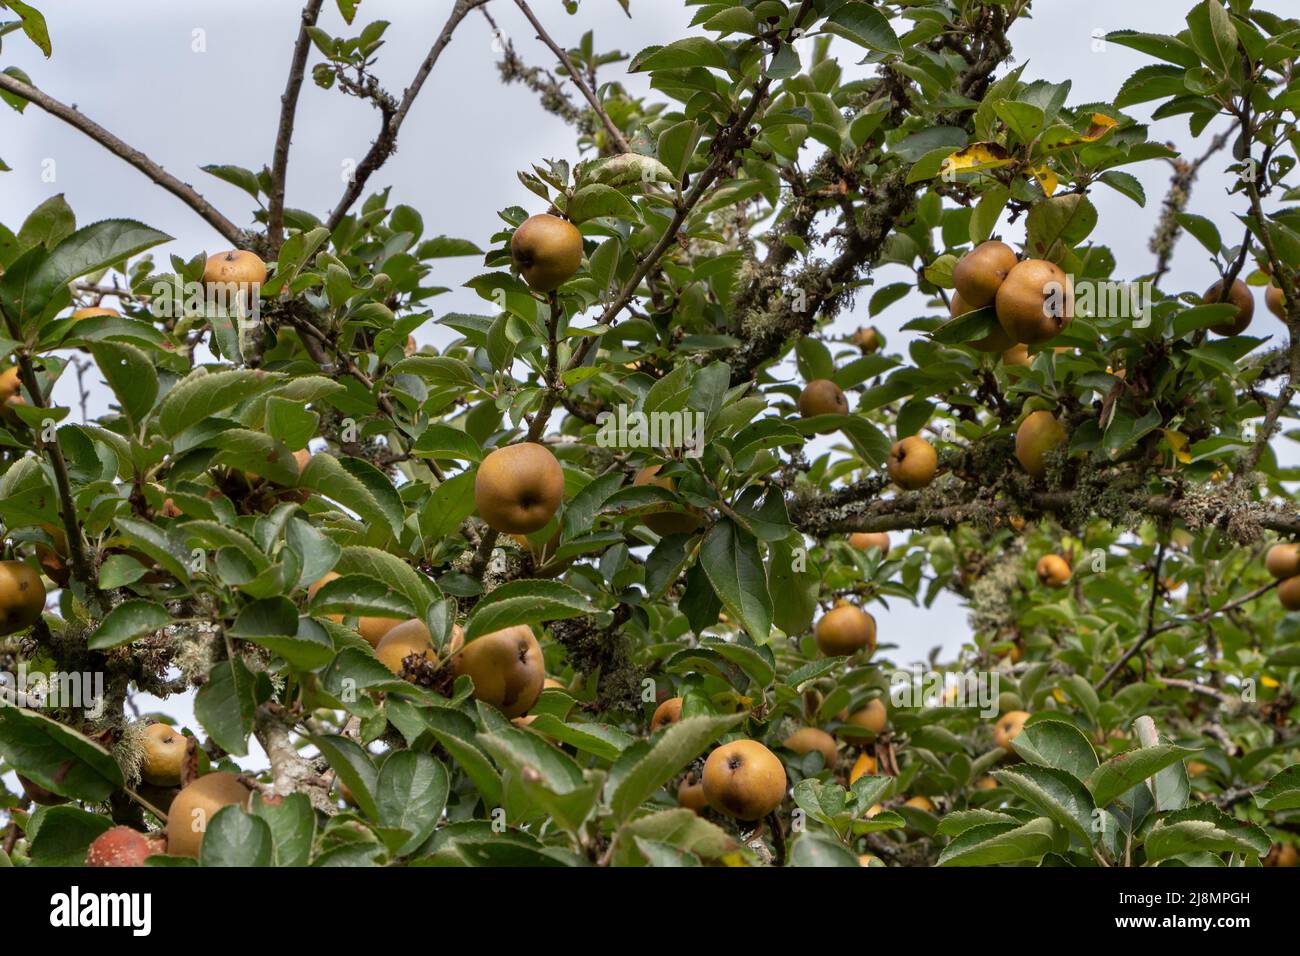 Apples ripening on an apple tree in an orchard during summer Stock Photo